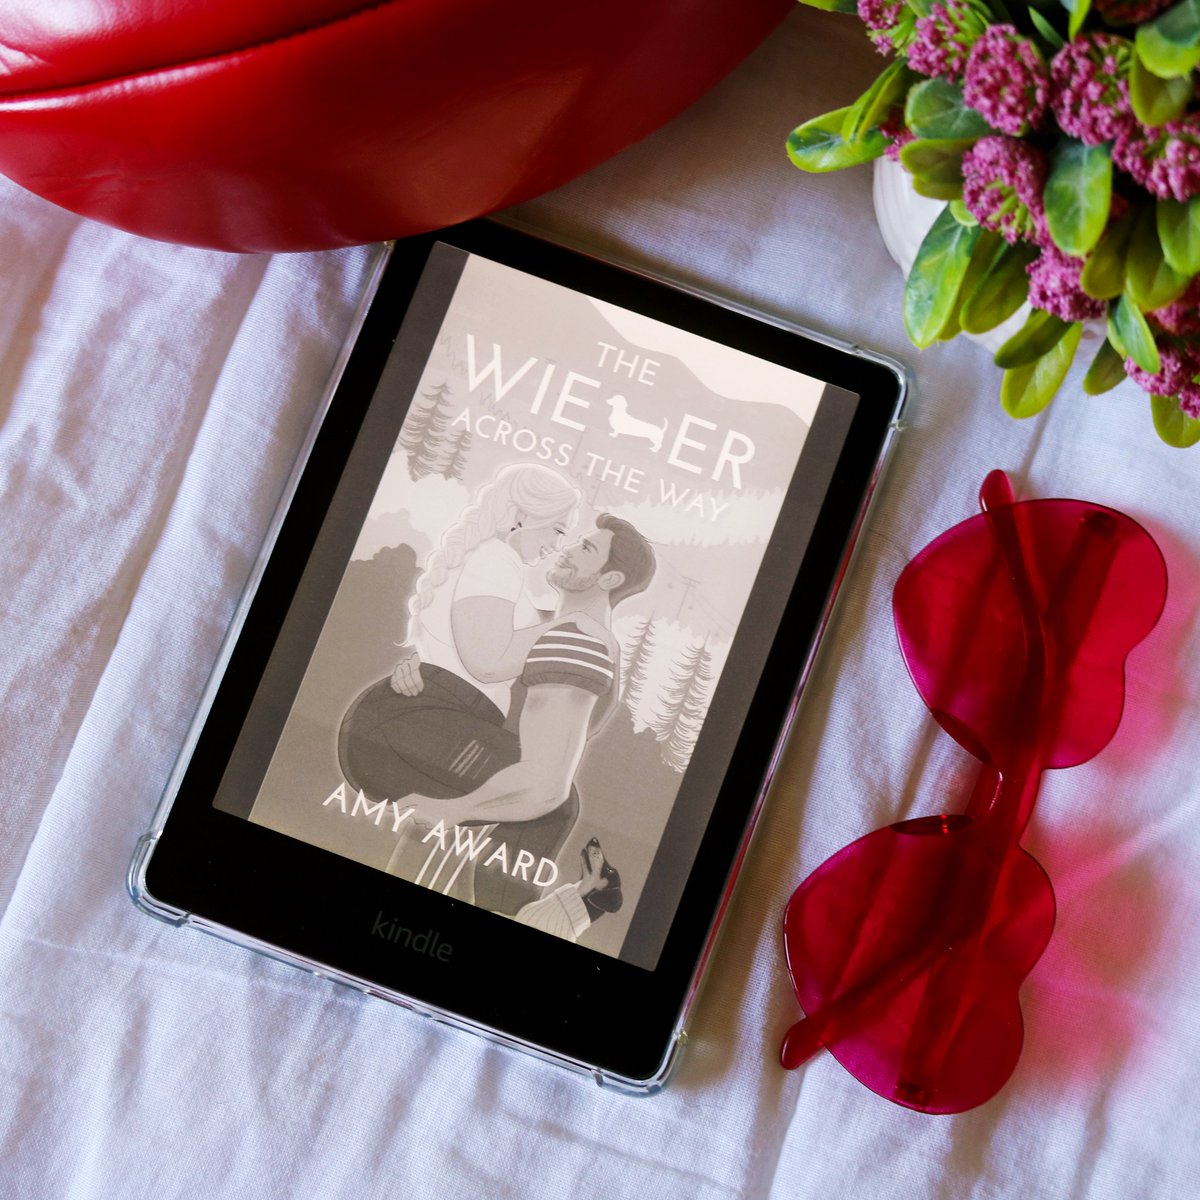 📚new post📚
THE WIENER ACROSS THE WAY | BOOK REVIEW
America’s pop princess thinks its all for show, but the NFLs meanest player wants it to be forever… 🎤

🔗 READ NOW: bit.ly/Review-TheWien…

#AmyAward #sportsromance #bookreview #bookblogger #romancebooks #romancereader